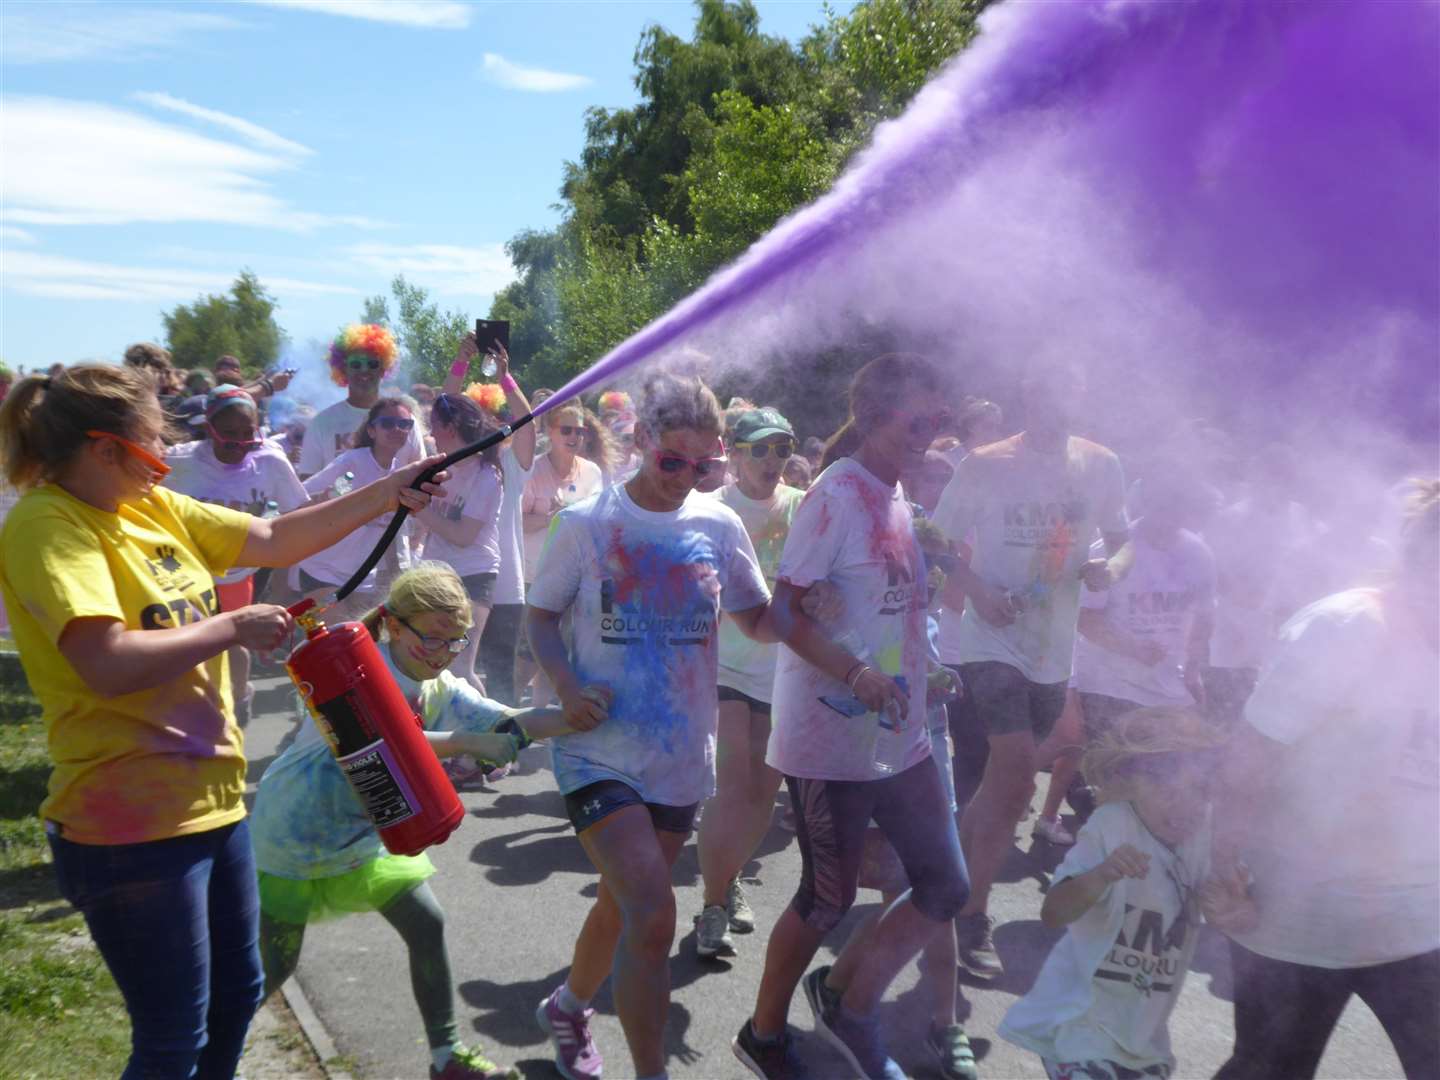 Colour run participants will be covered in coloured powder at colour stations around the 5K route. (1728180)